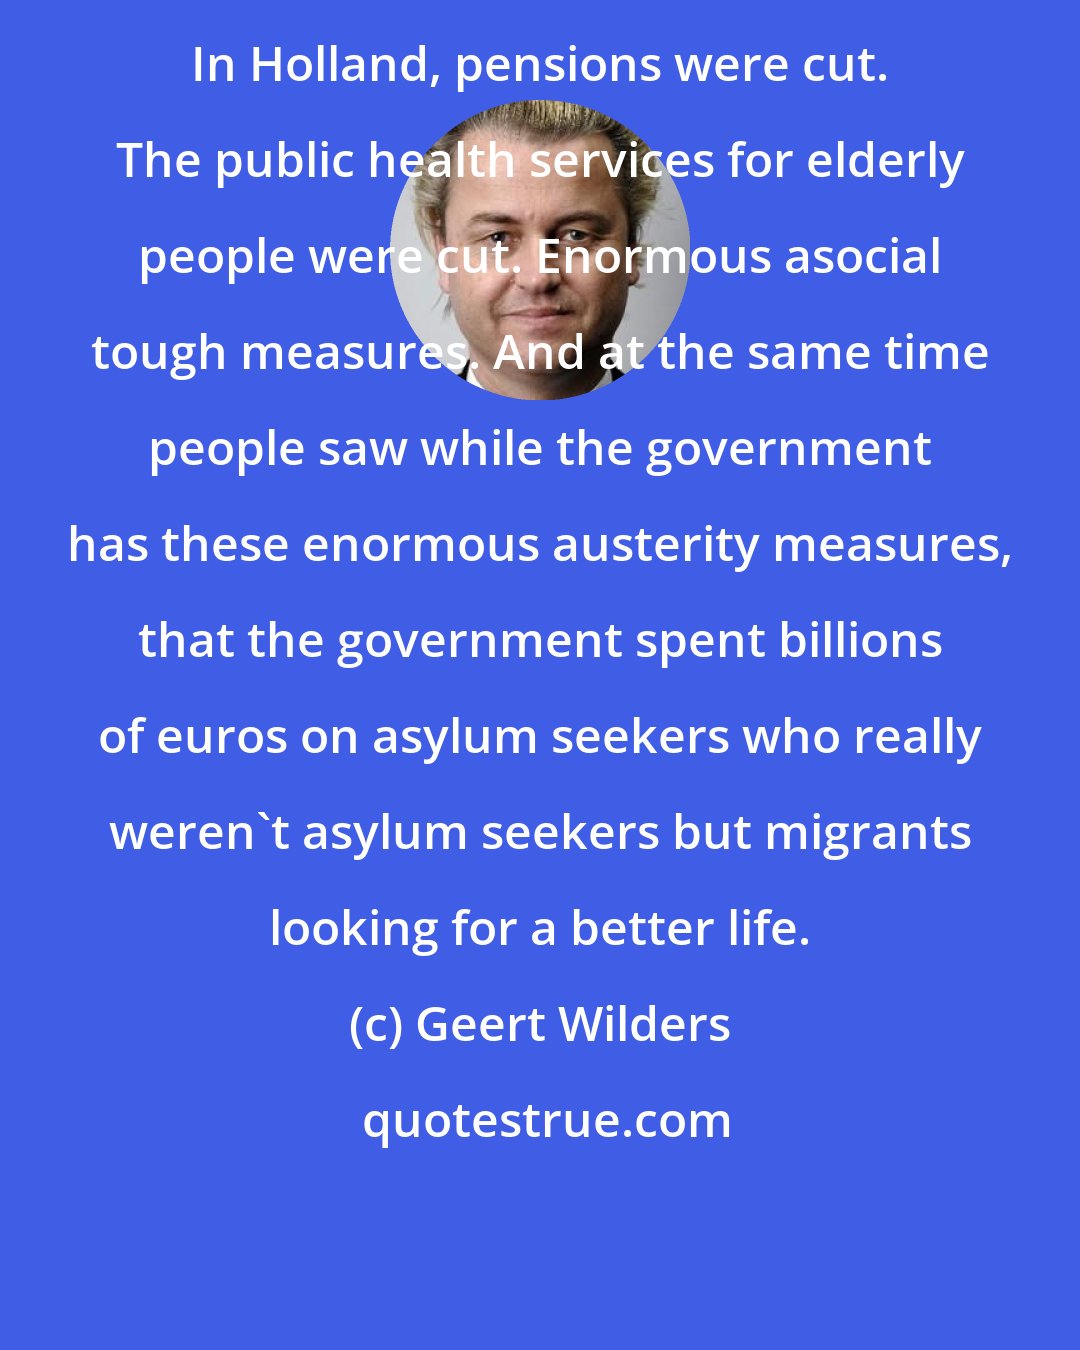 Geert Wilders: In Holland, pensions were cut. The public health services for elderly people were cut. Enormous asocial tough measures. And at the same time people saw while the government has these enormous austerity measures, that the government spent billions of euros on asylum seekers who really weren't asylum seekers but migrants looking for a better life.